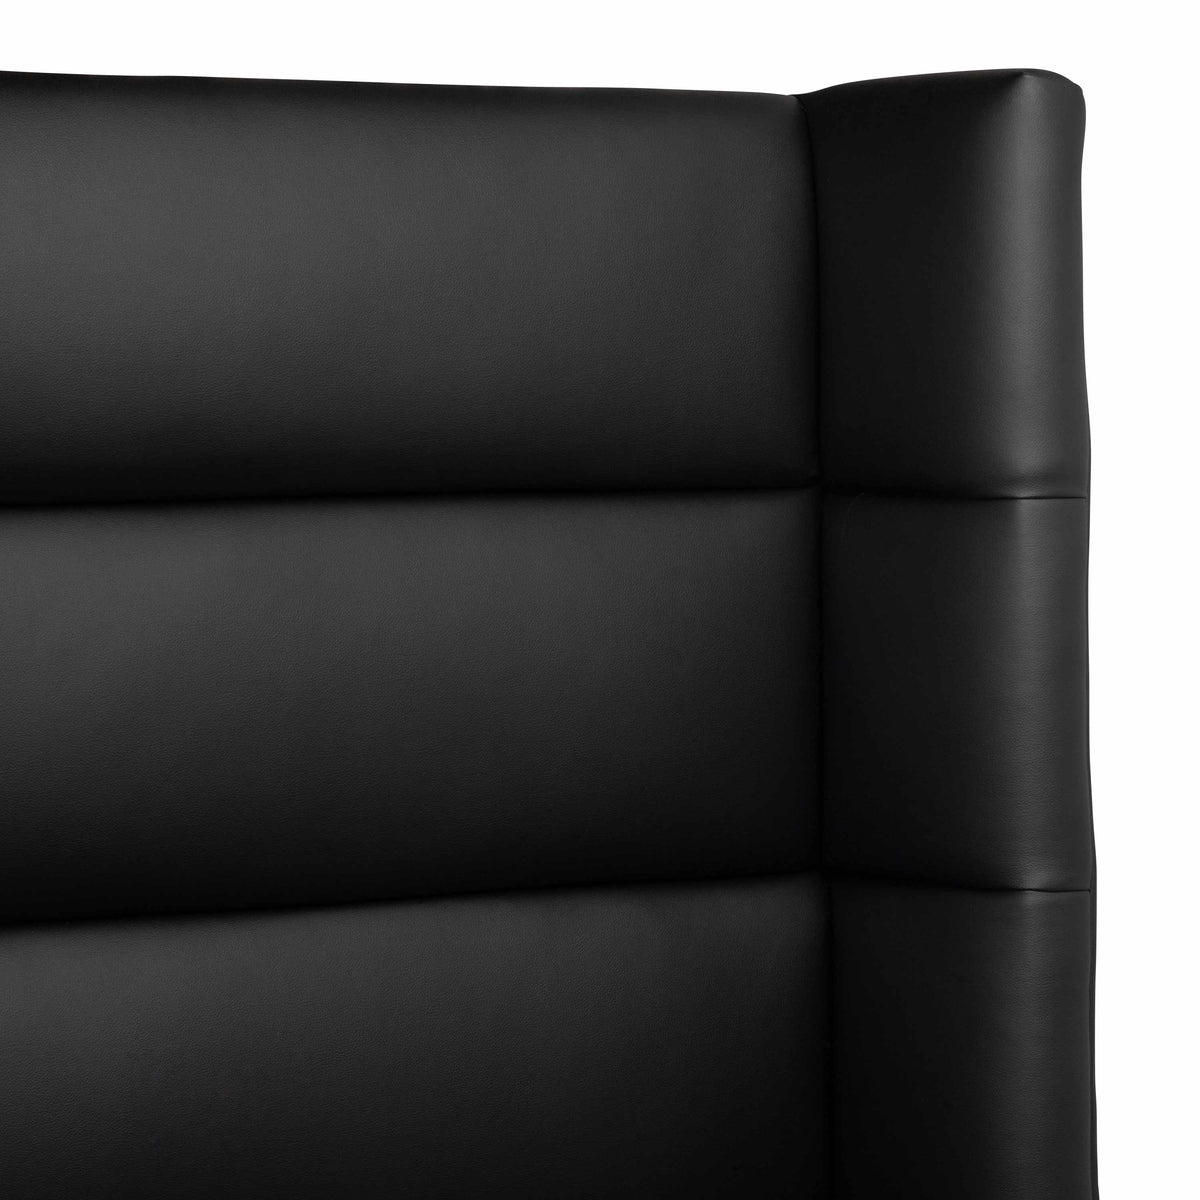 Madrid Bed in Black Faux Leather